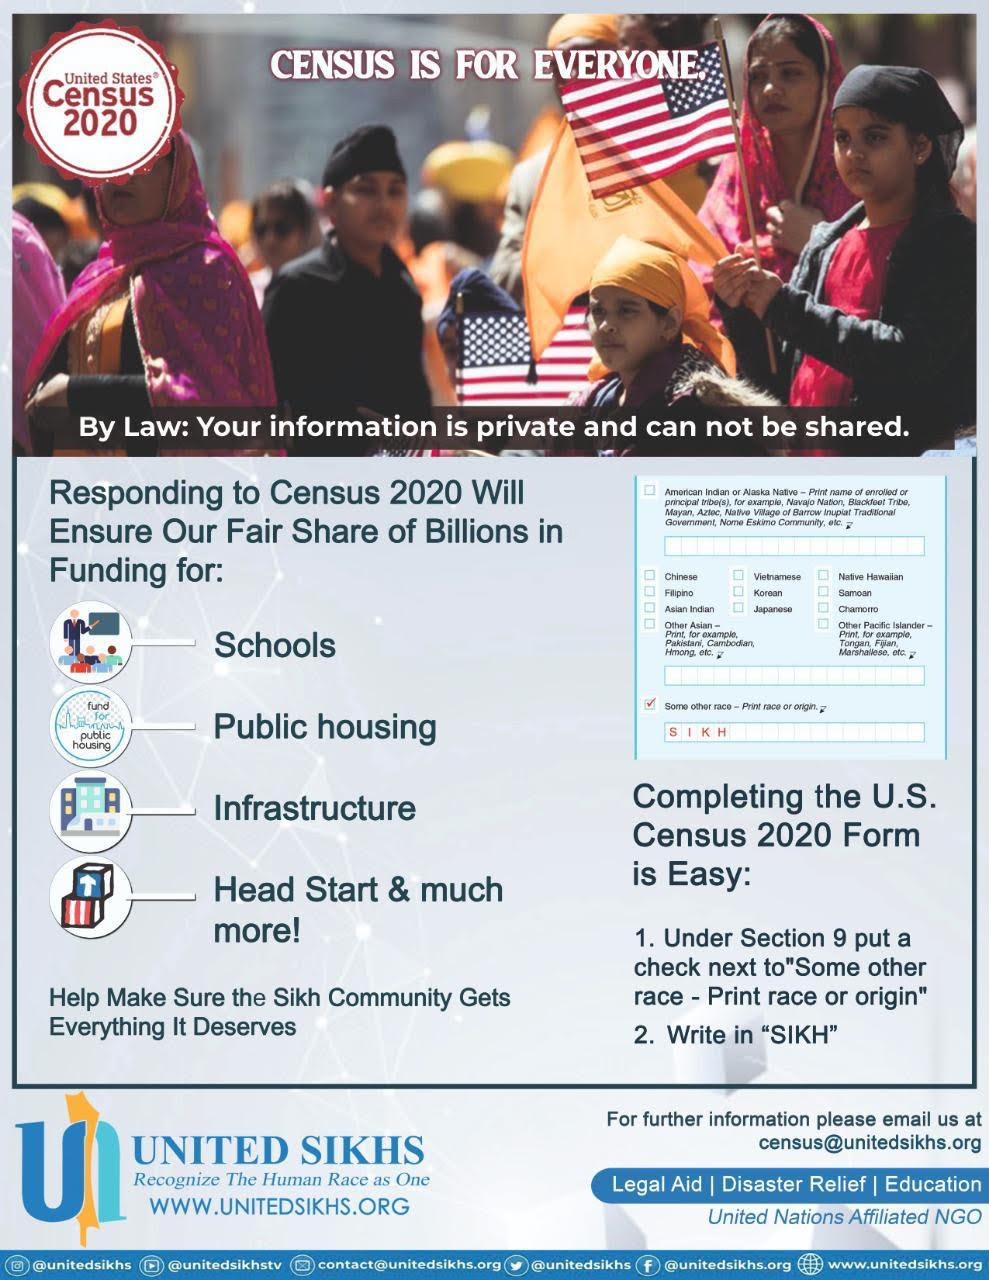 Step by step information on how to complete the U.S. Census 2020 form. 